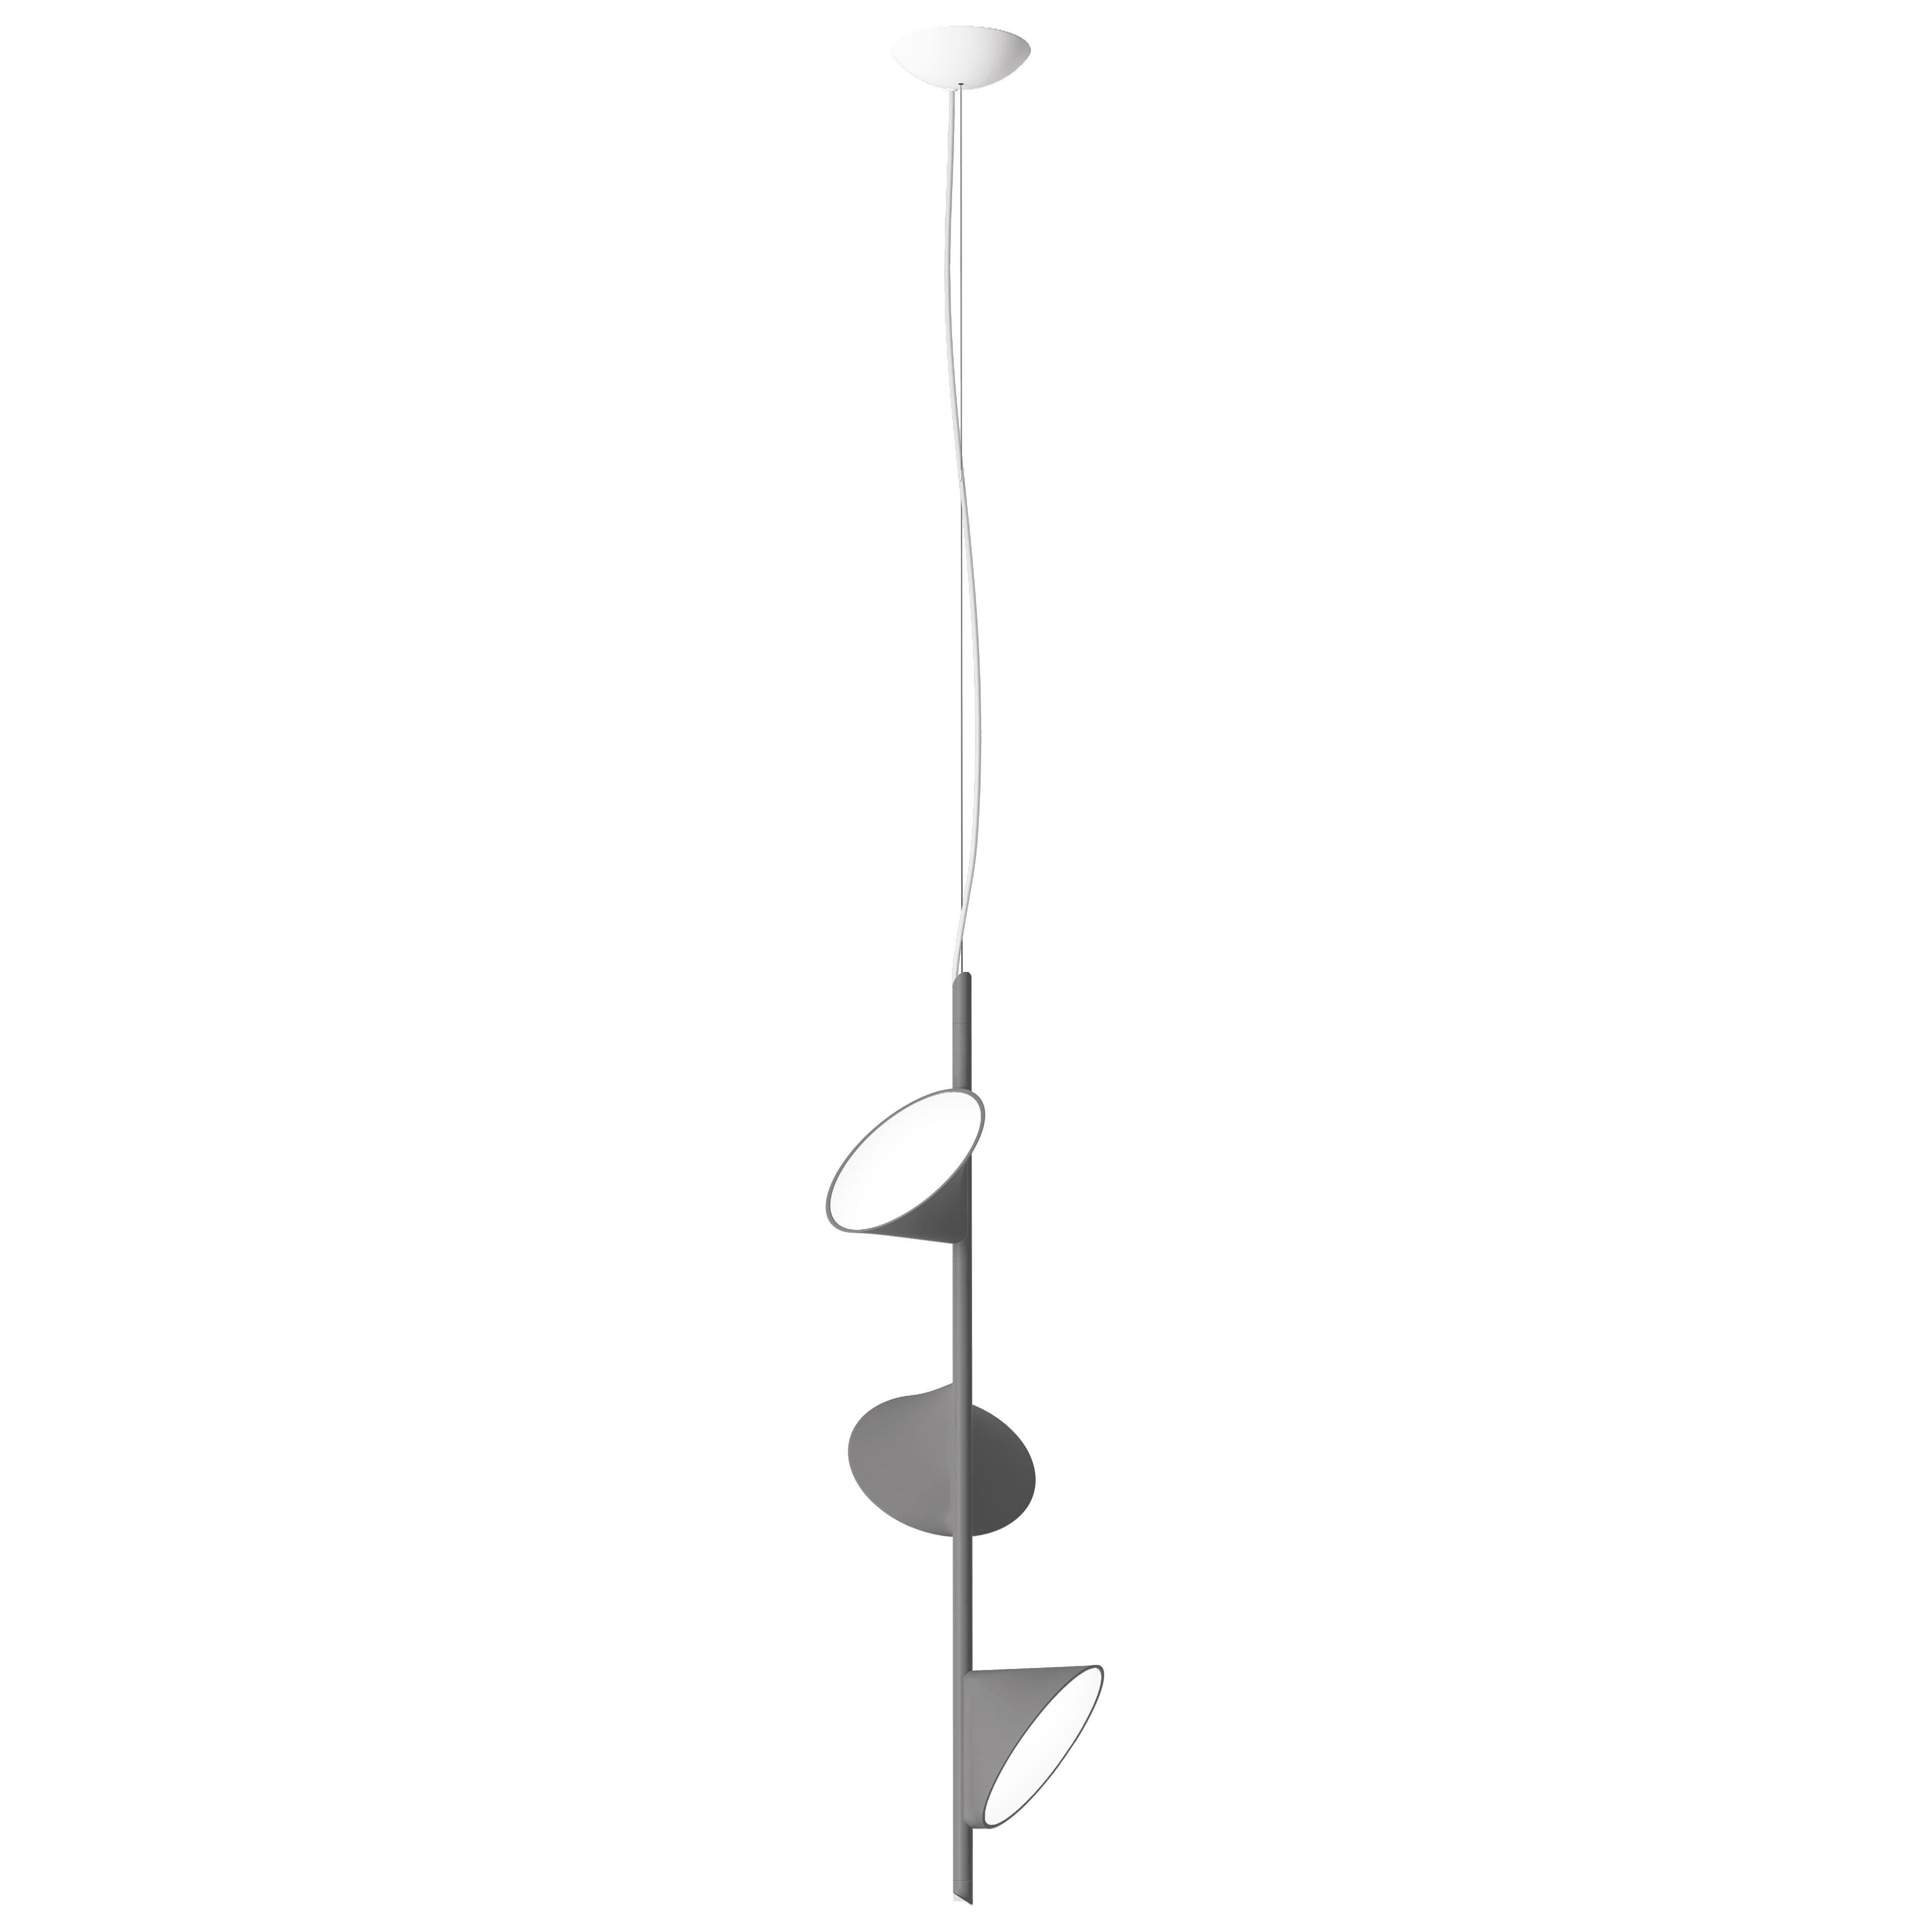 Axolight Orchid 3 Light Pendant Lamp with Aluminum Body in Anthracite Grey For Sale